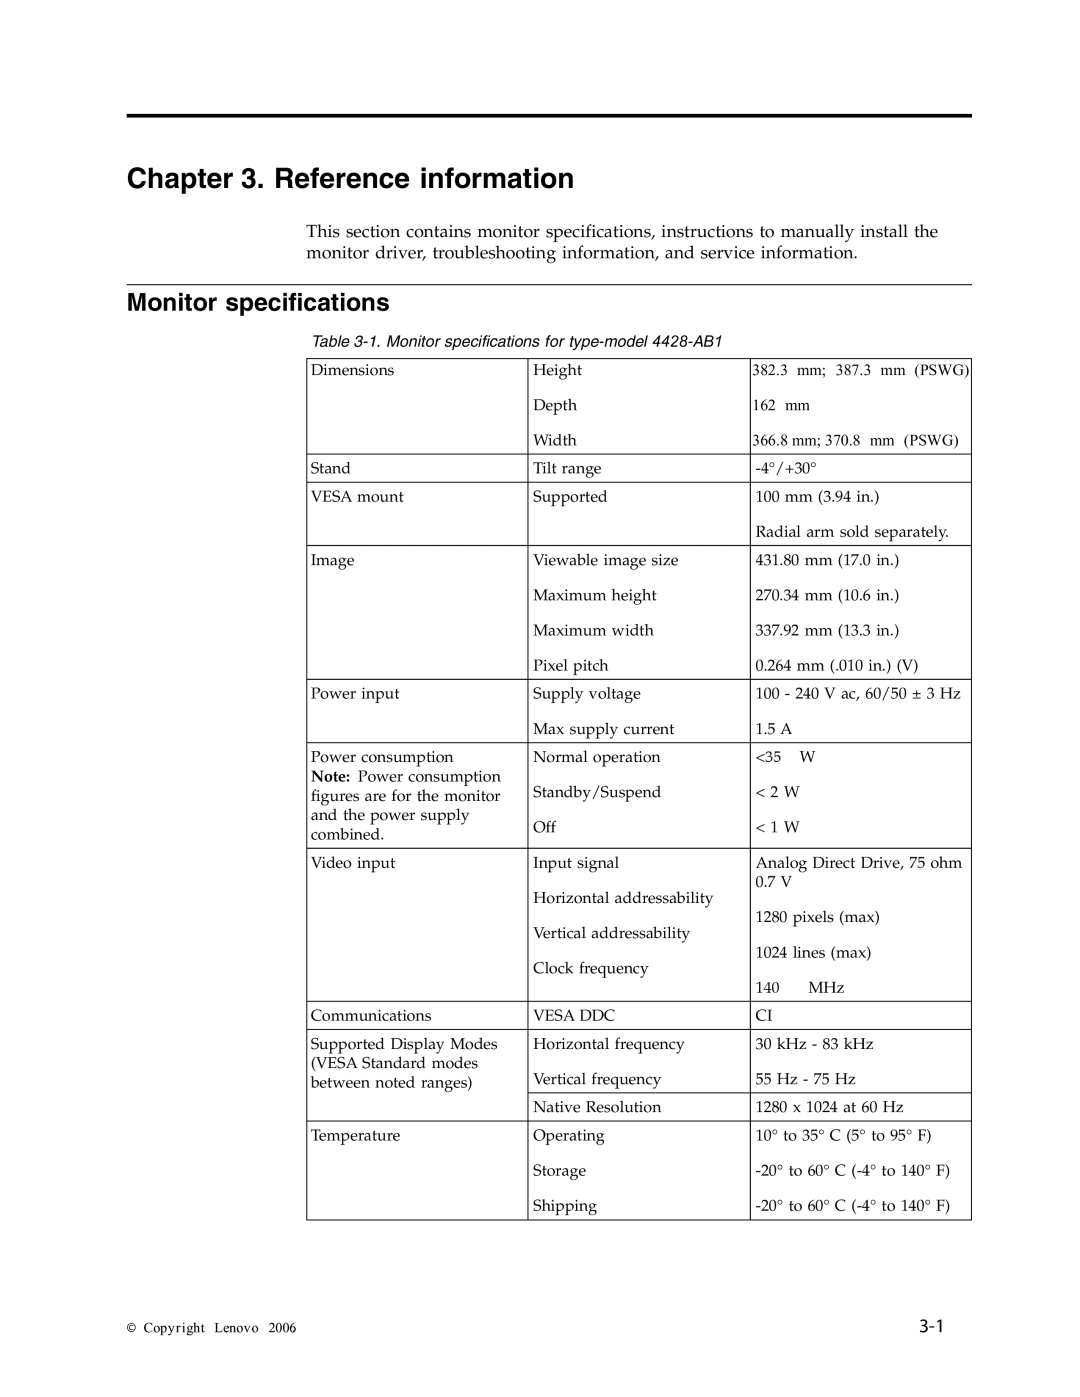 Lenovo manual Reference information, 1. Monitor specifications for type-model 4428-AB1 